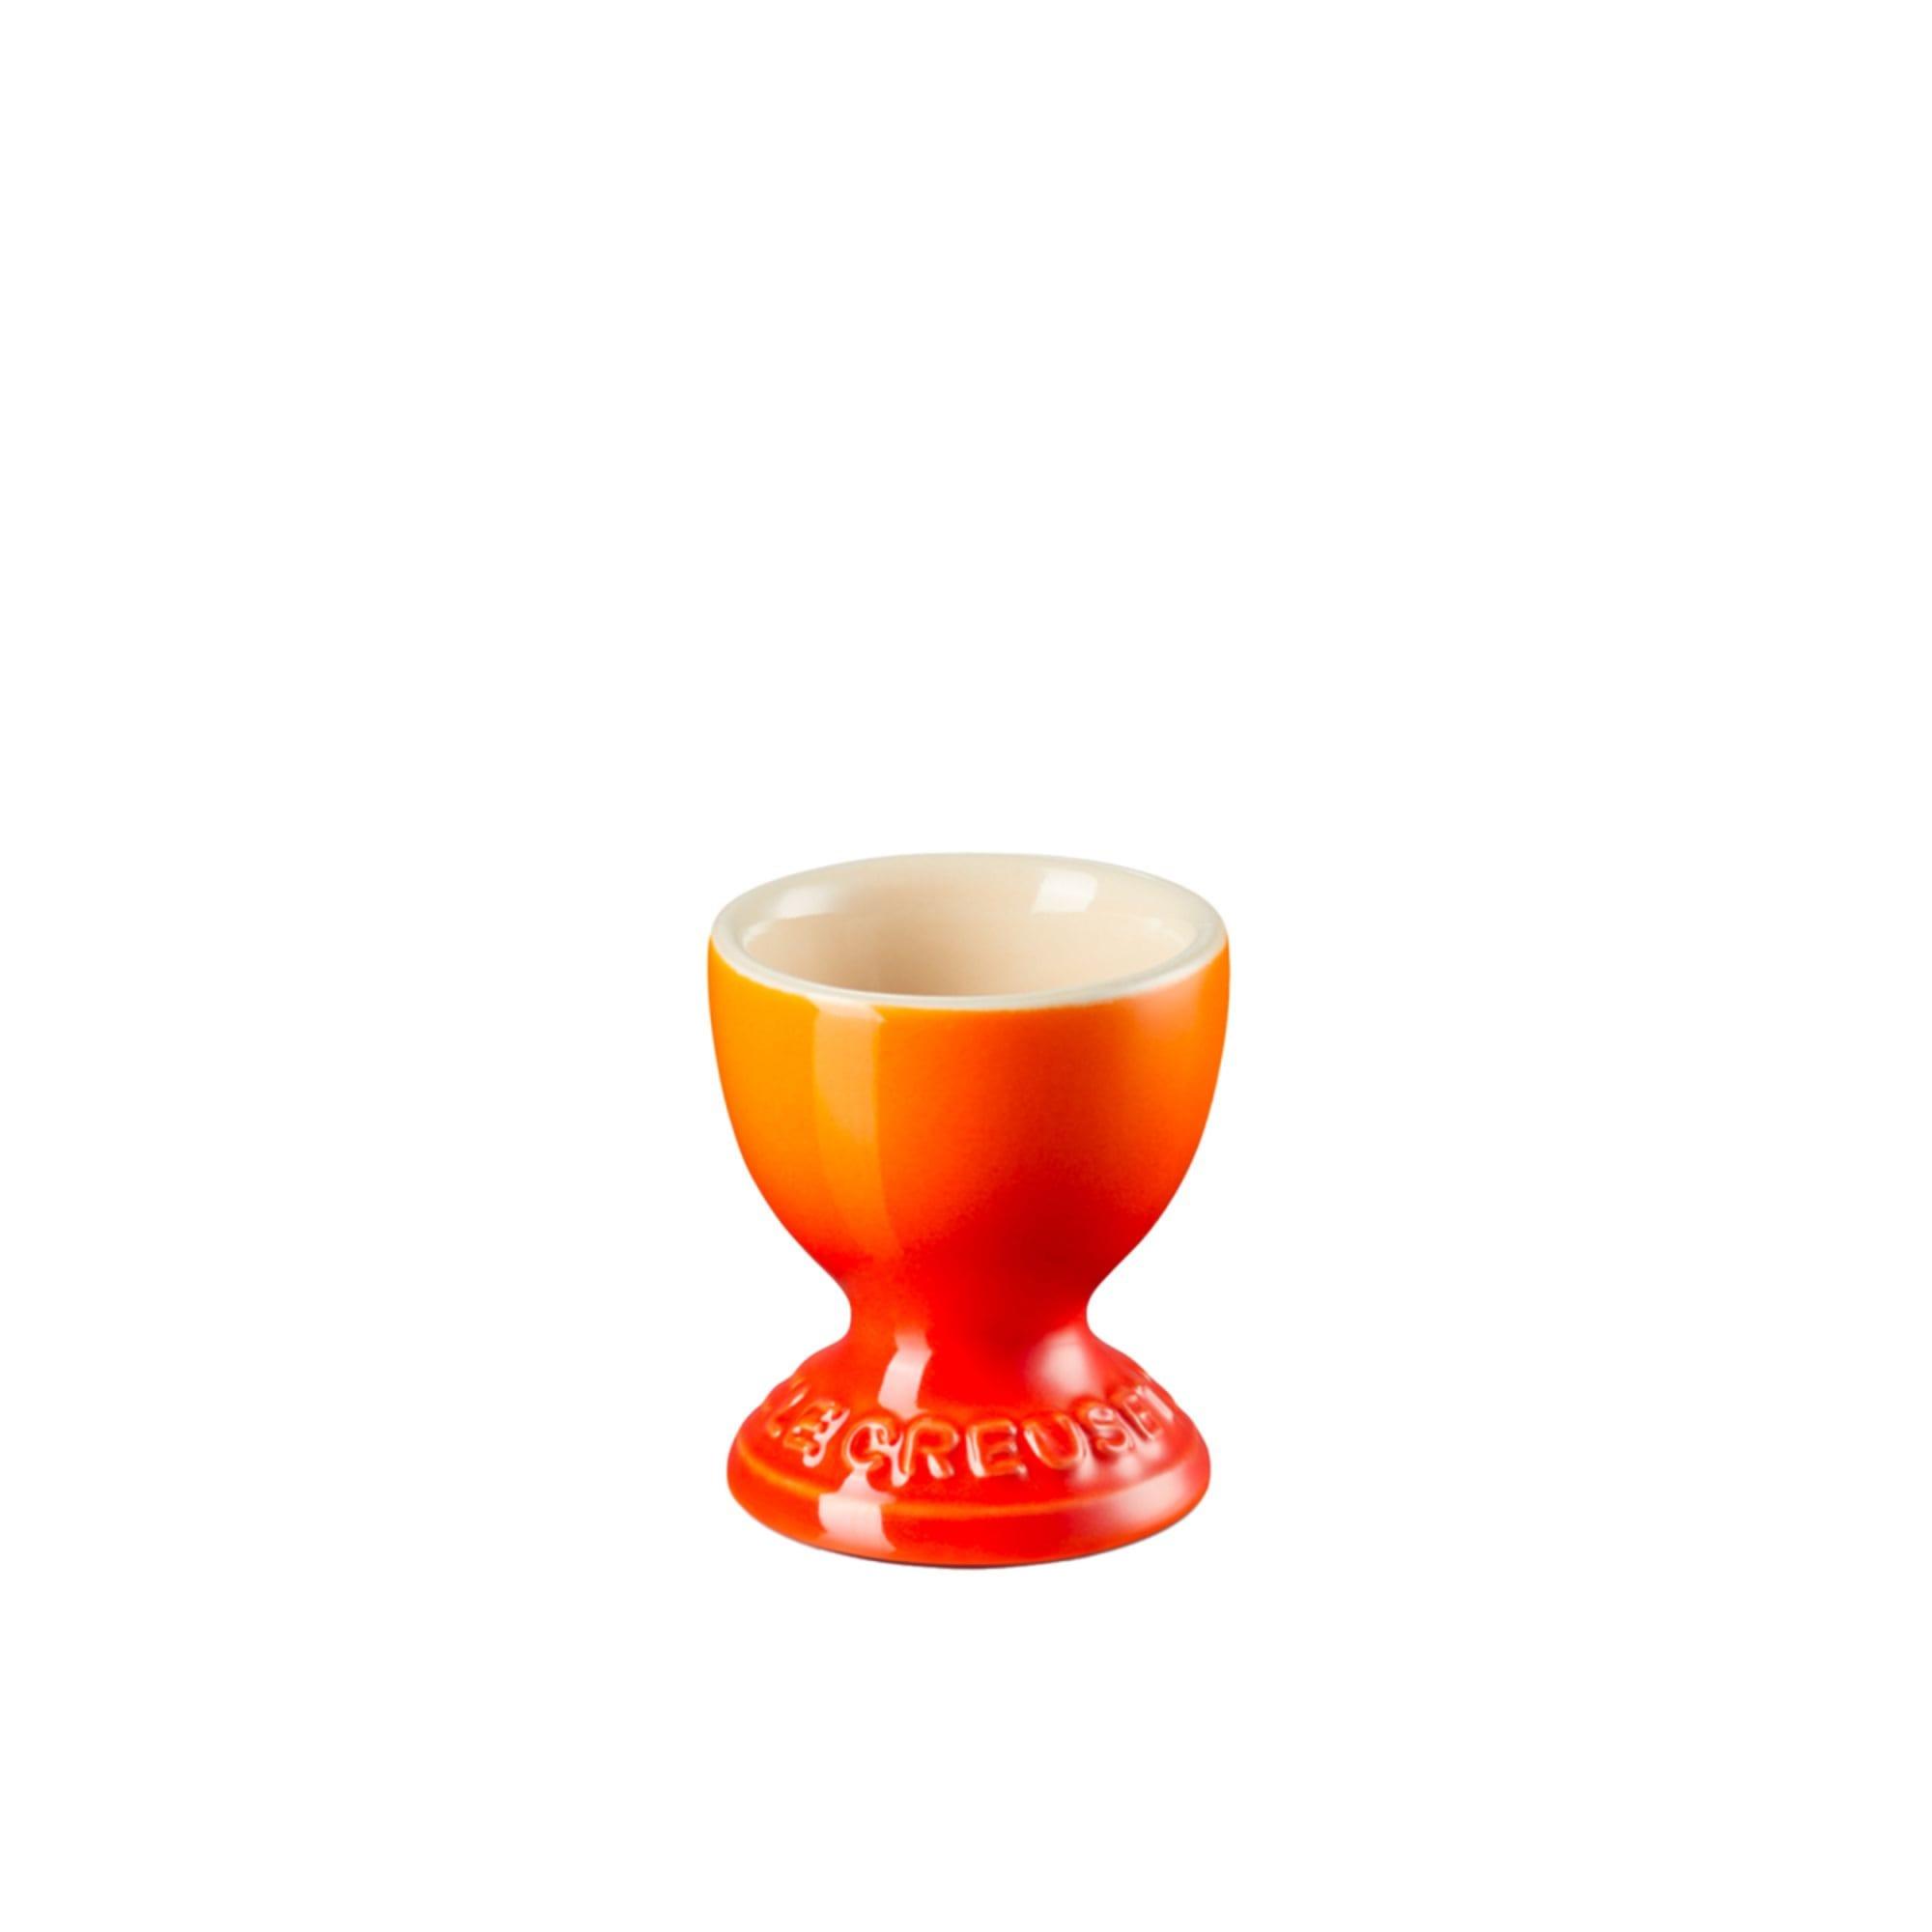 Le Creuset Stoneware Egg Cup Volcanic Image 1